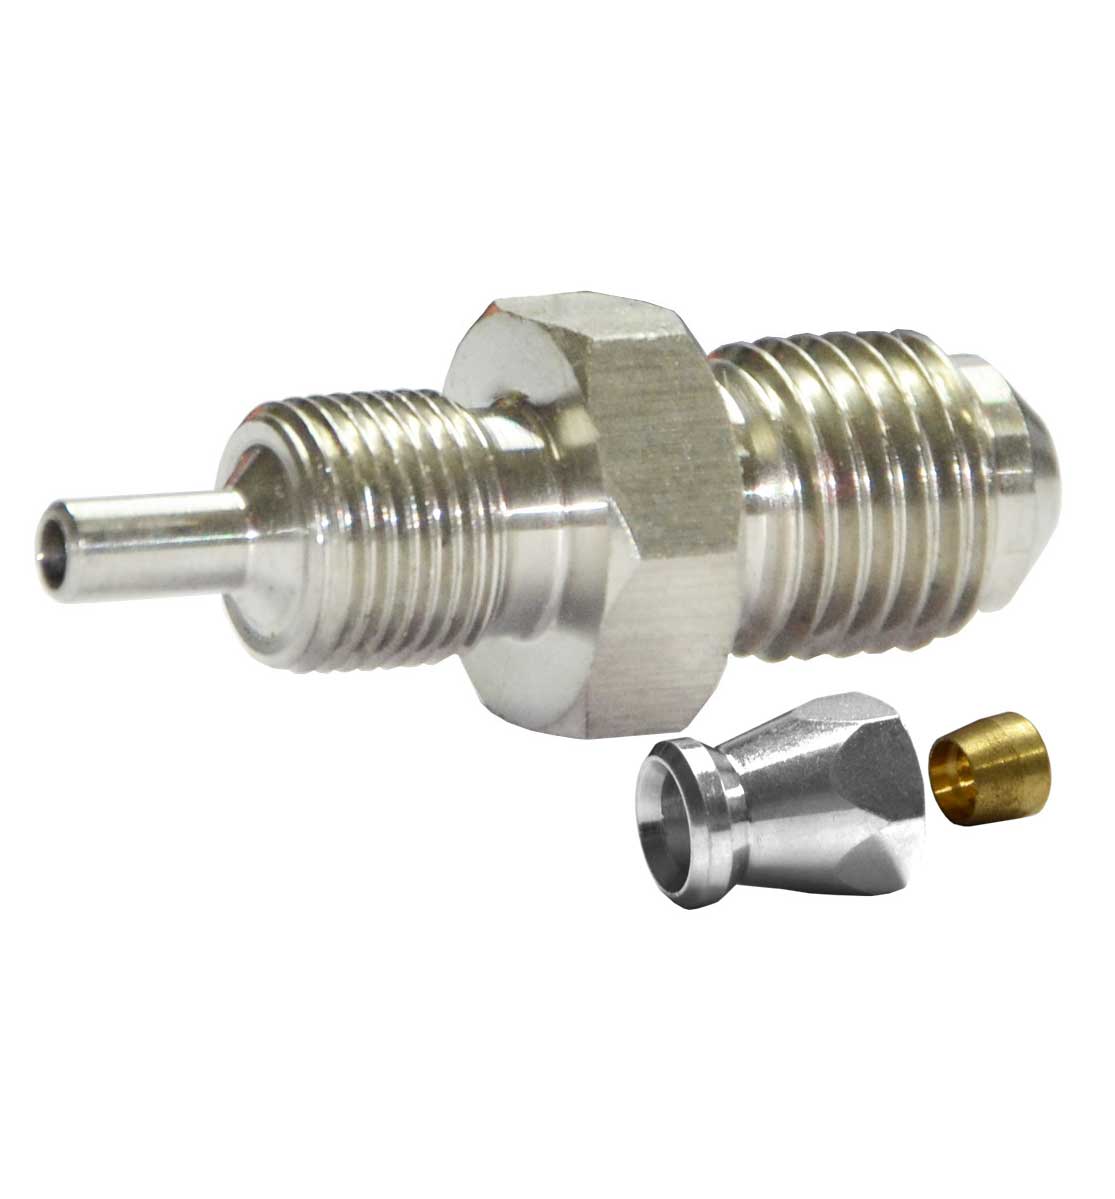 7/16" UNF Male Convex Fitting for AN-3 (3mm) - Stainless Steel